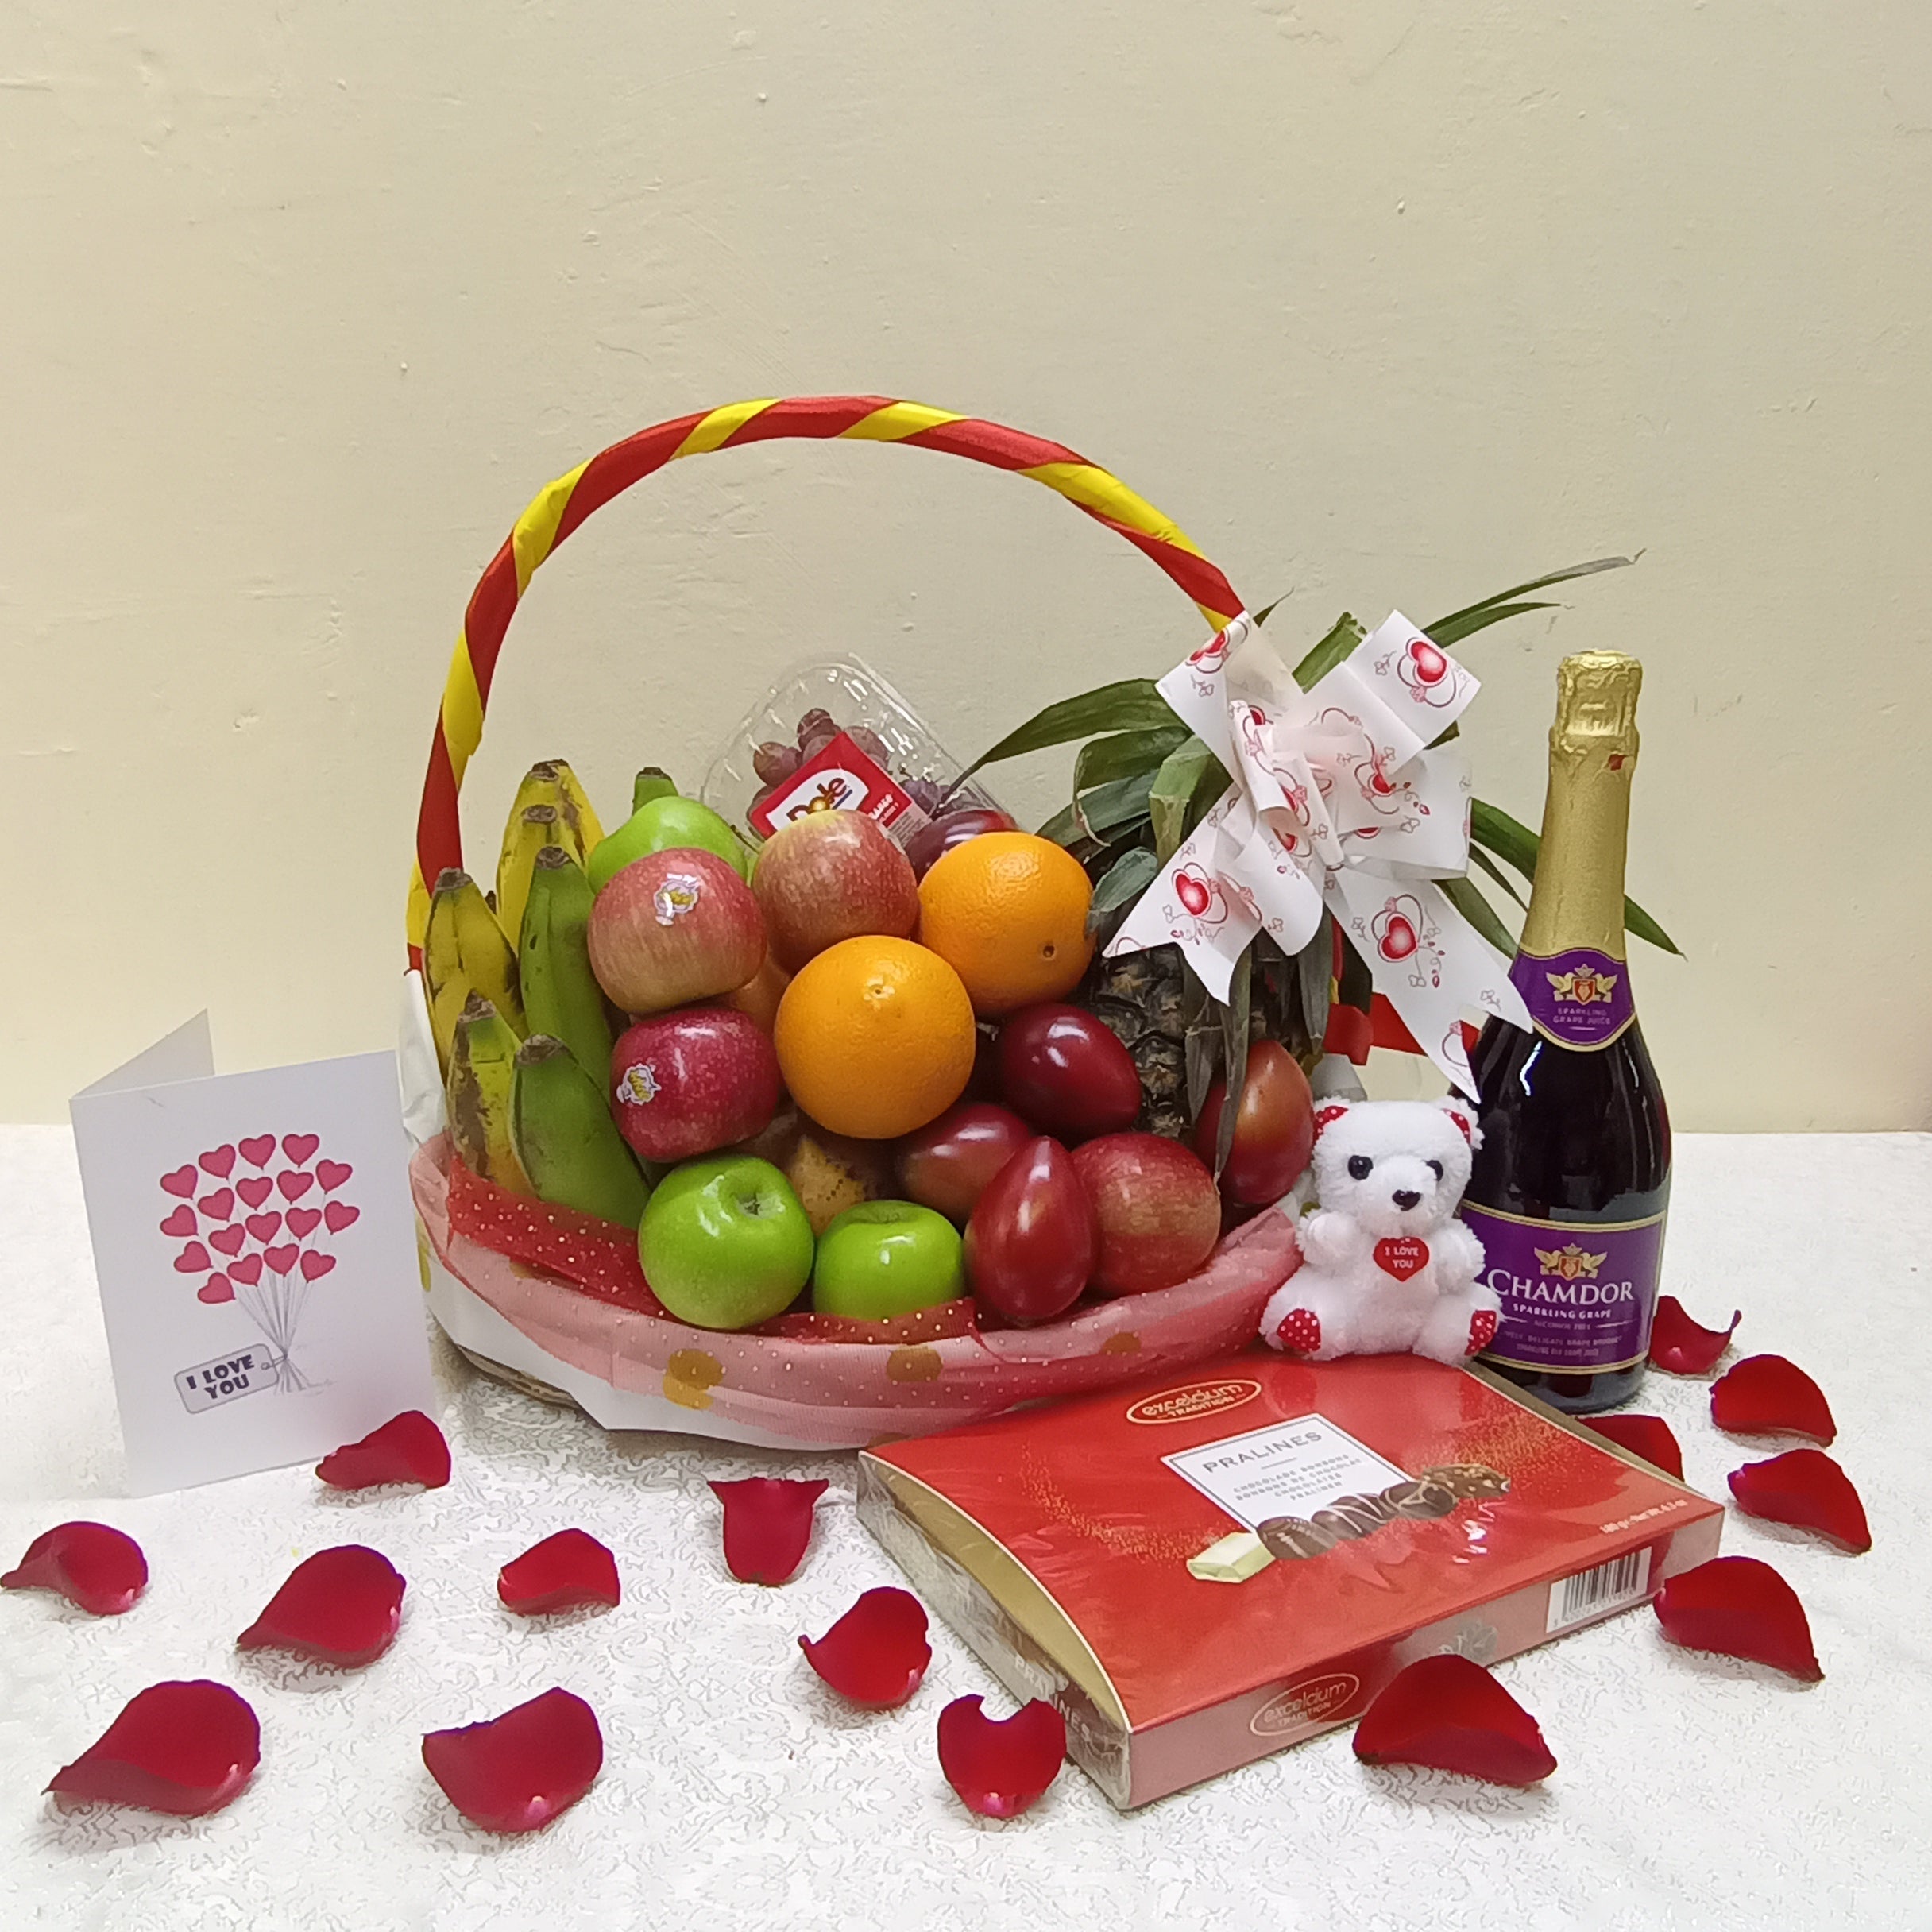 Lovers fruit basket with wine and chocolate